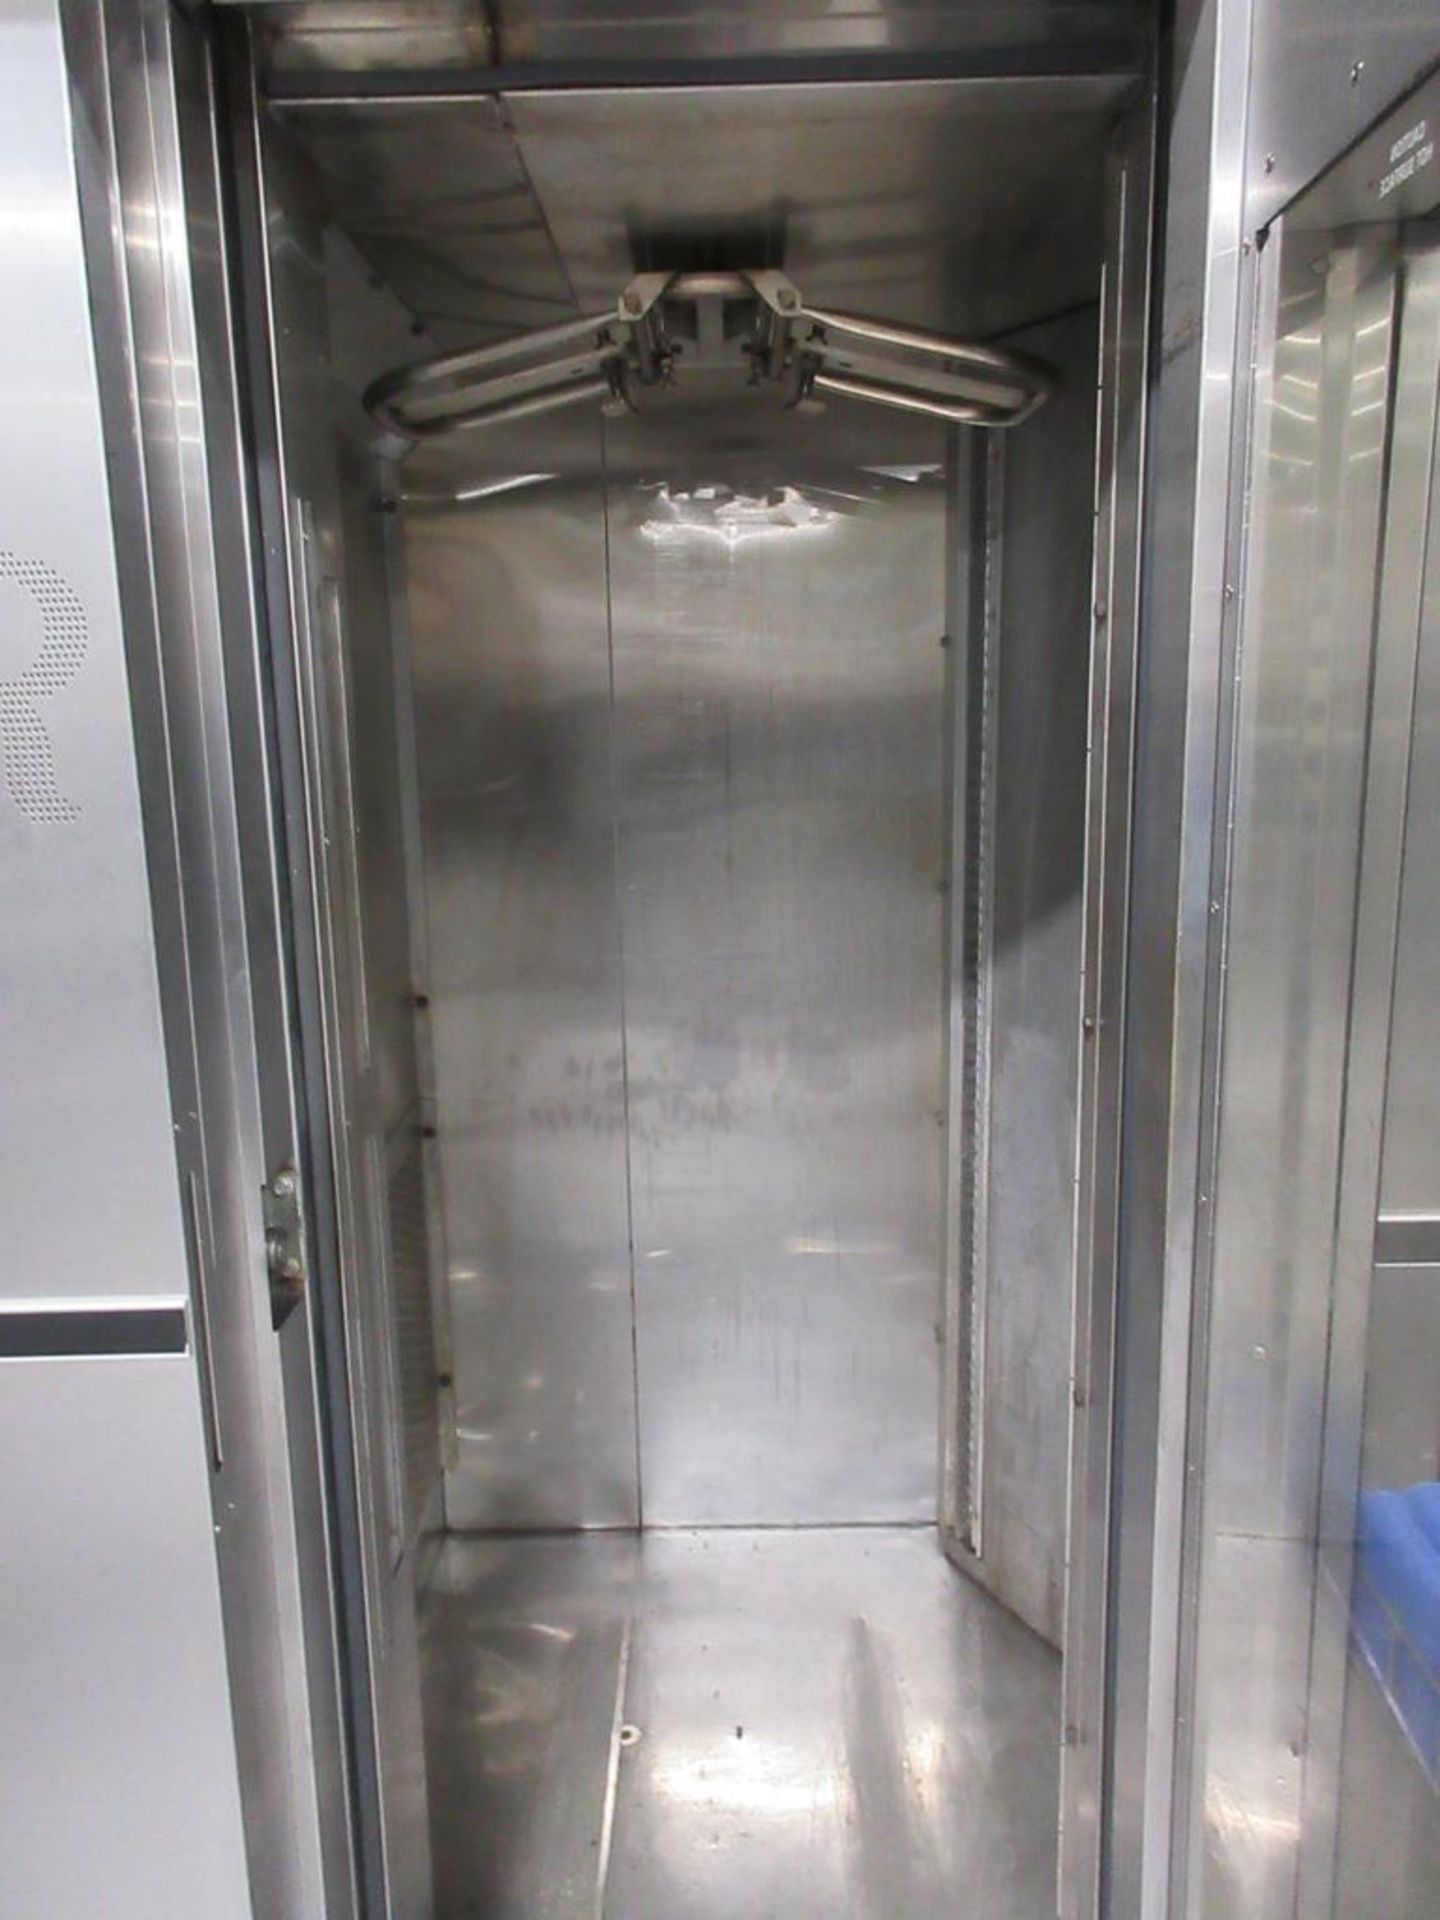 Revent stainless steel electric single rack rotary oven, type 726 EL, serial no. 09.2641.160, - Image 3 of 10